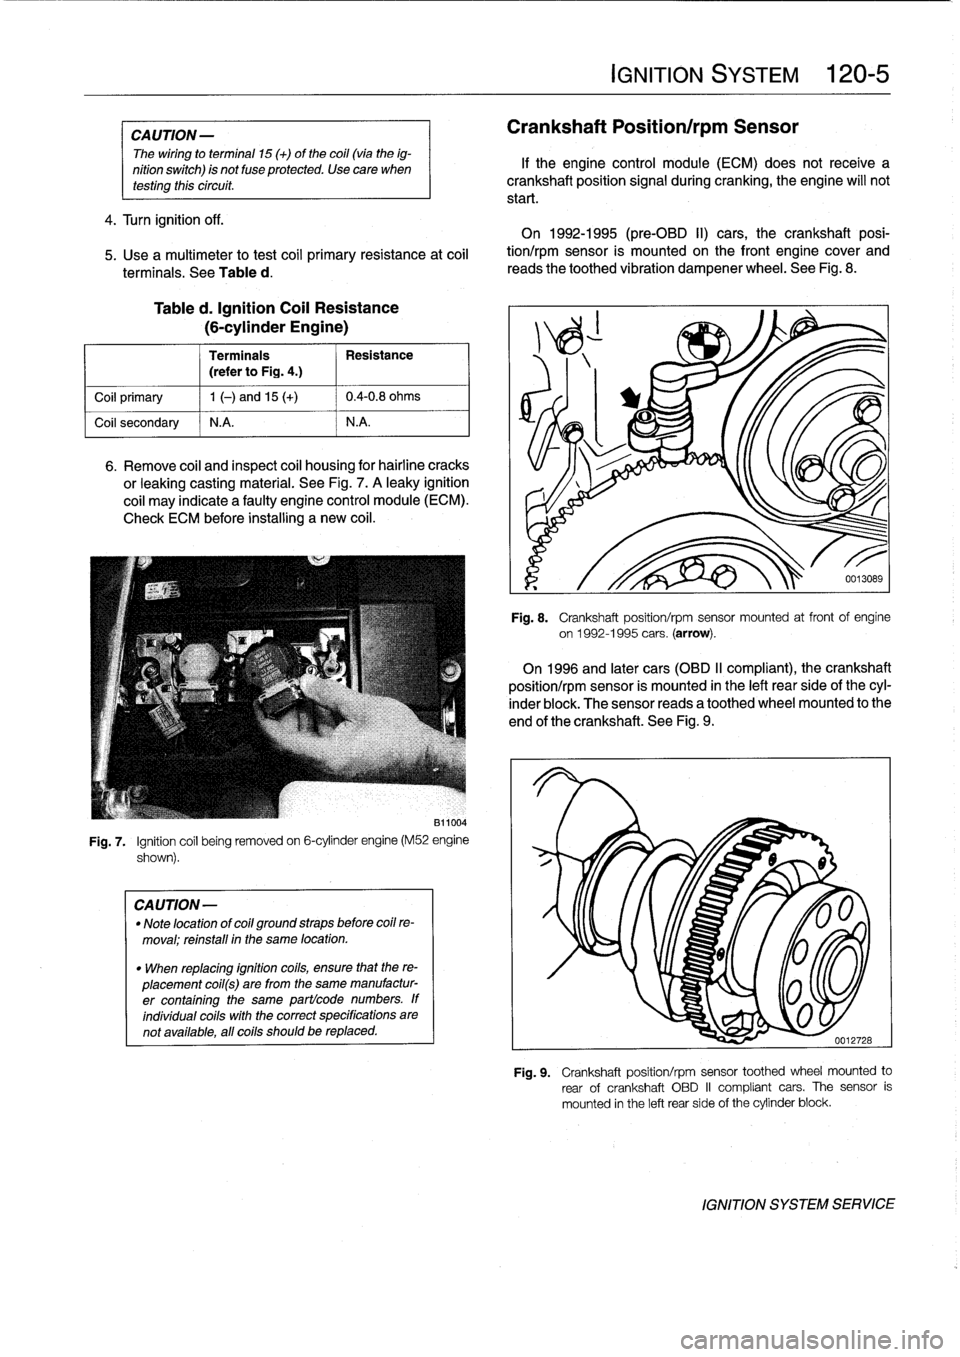 BMW 328i 1994 E36 Workshop Manual 
CAUTION
-

The
wiring
to
termina¡
15
(+)
of
the
coil(vía
the
ig-

nition
switch)
is
not
fuse
protected
.
Use
care
when
testíng
thiscircuit
.

4
.
Turn
ignition
off
.

5
.
Use
a
multimeter
to
test
